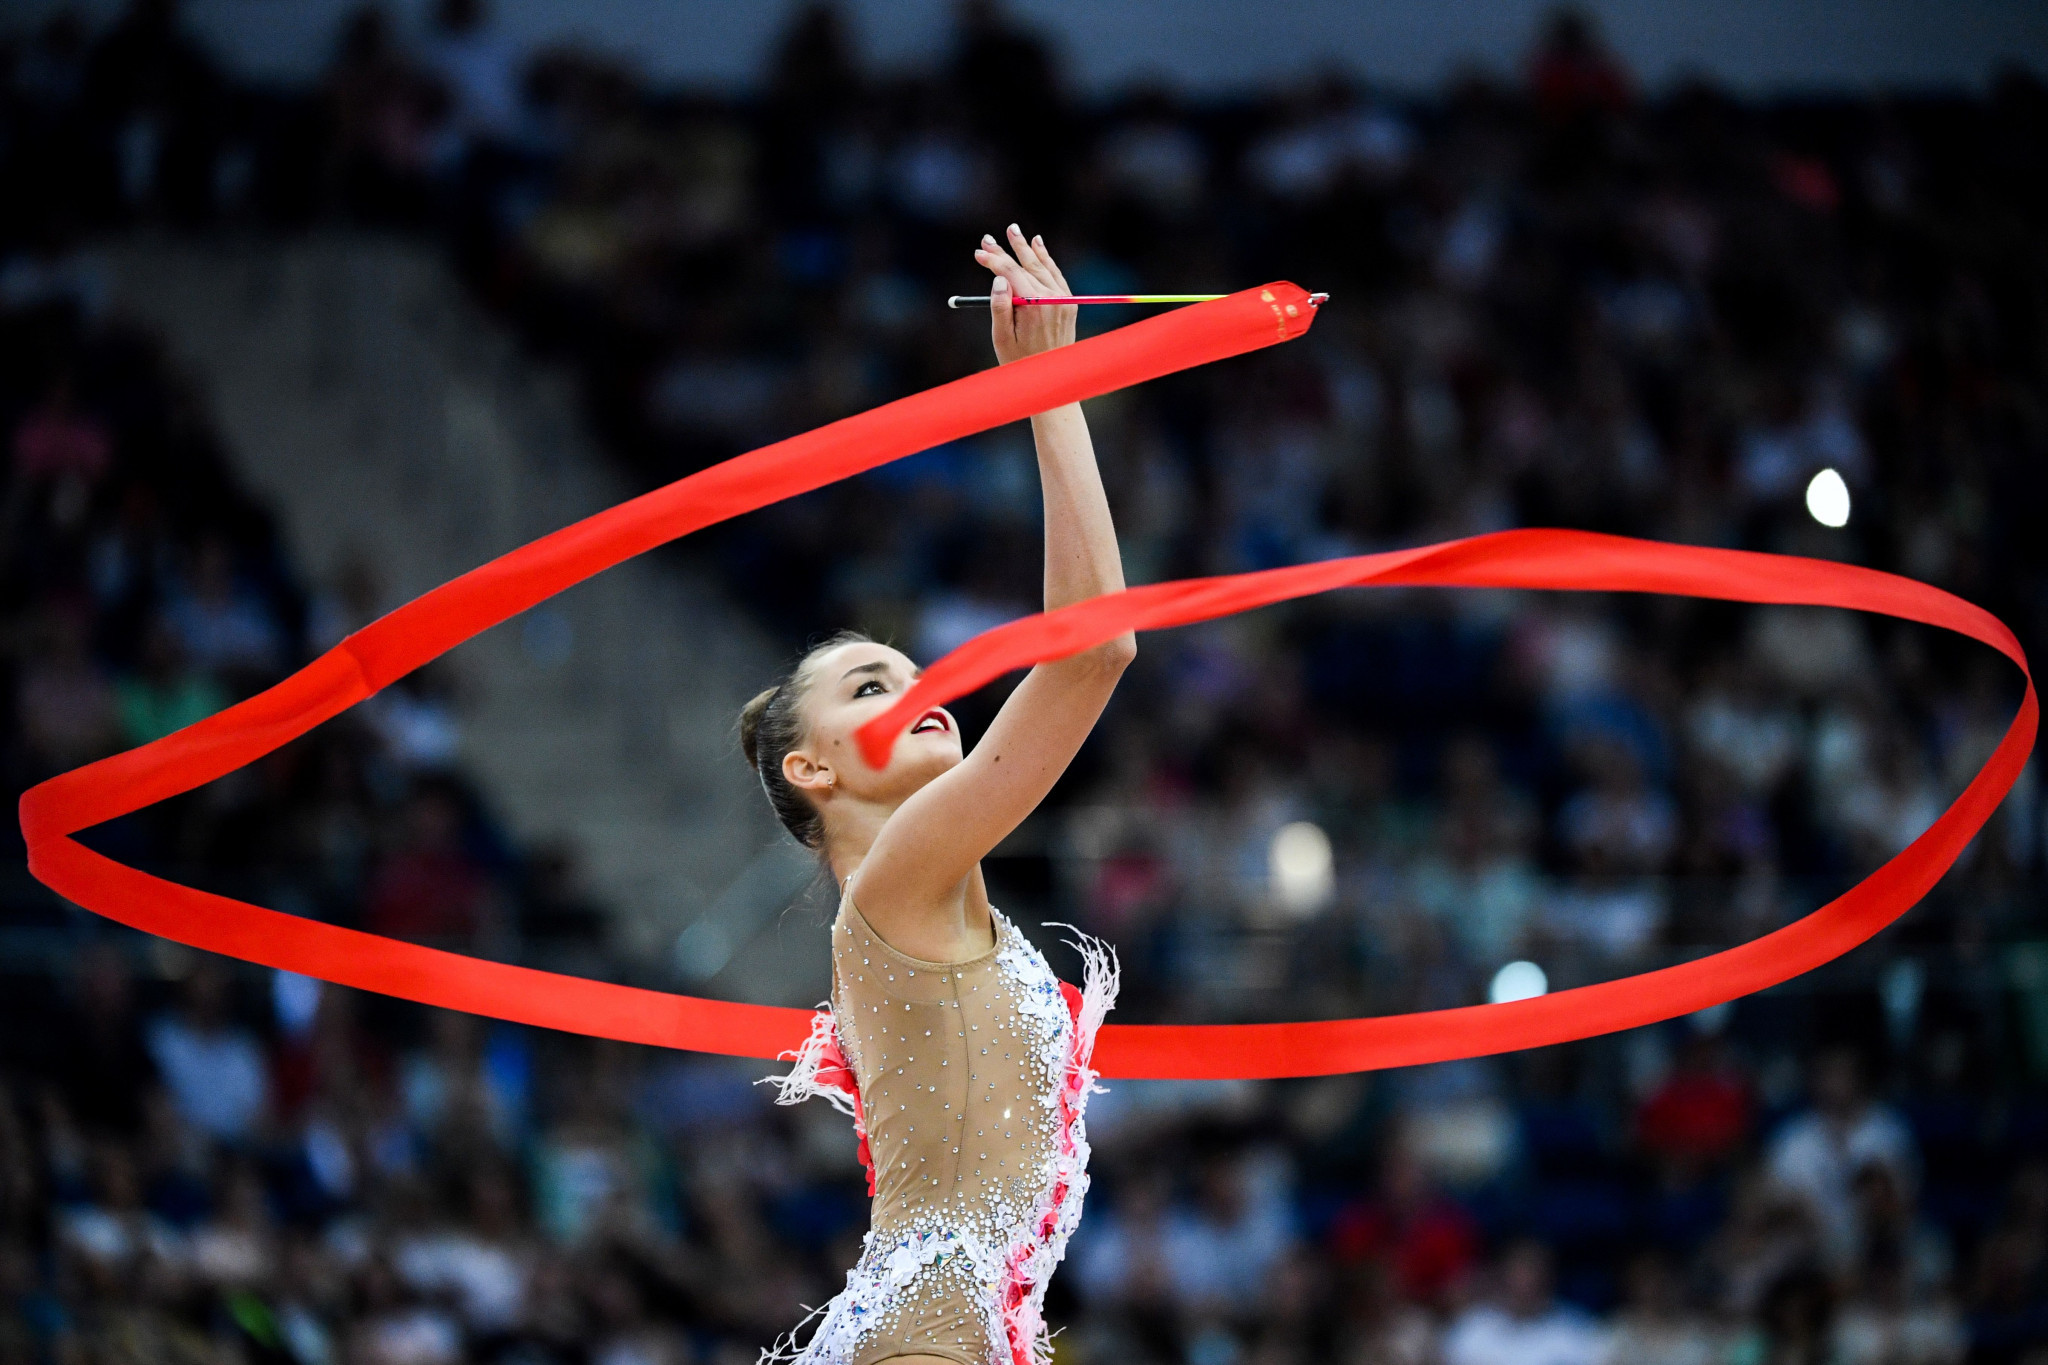 ROC officials claimed Dina Averina was the rightful gold medallist, but FIG rejected such claims ©Getty Images